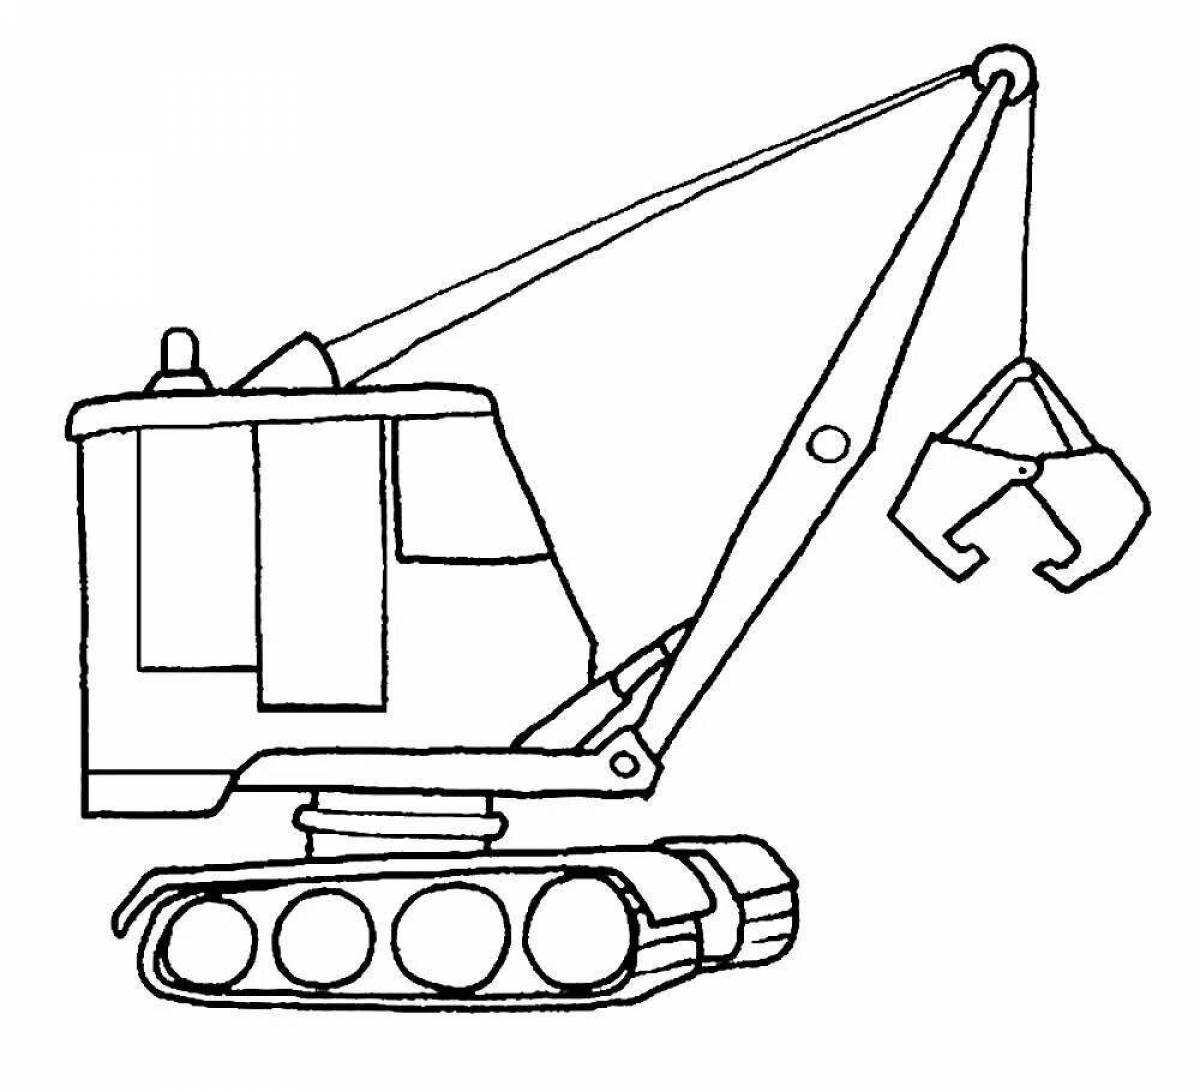 Great construction vehicle coloring book for kids